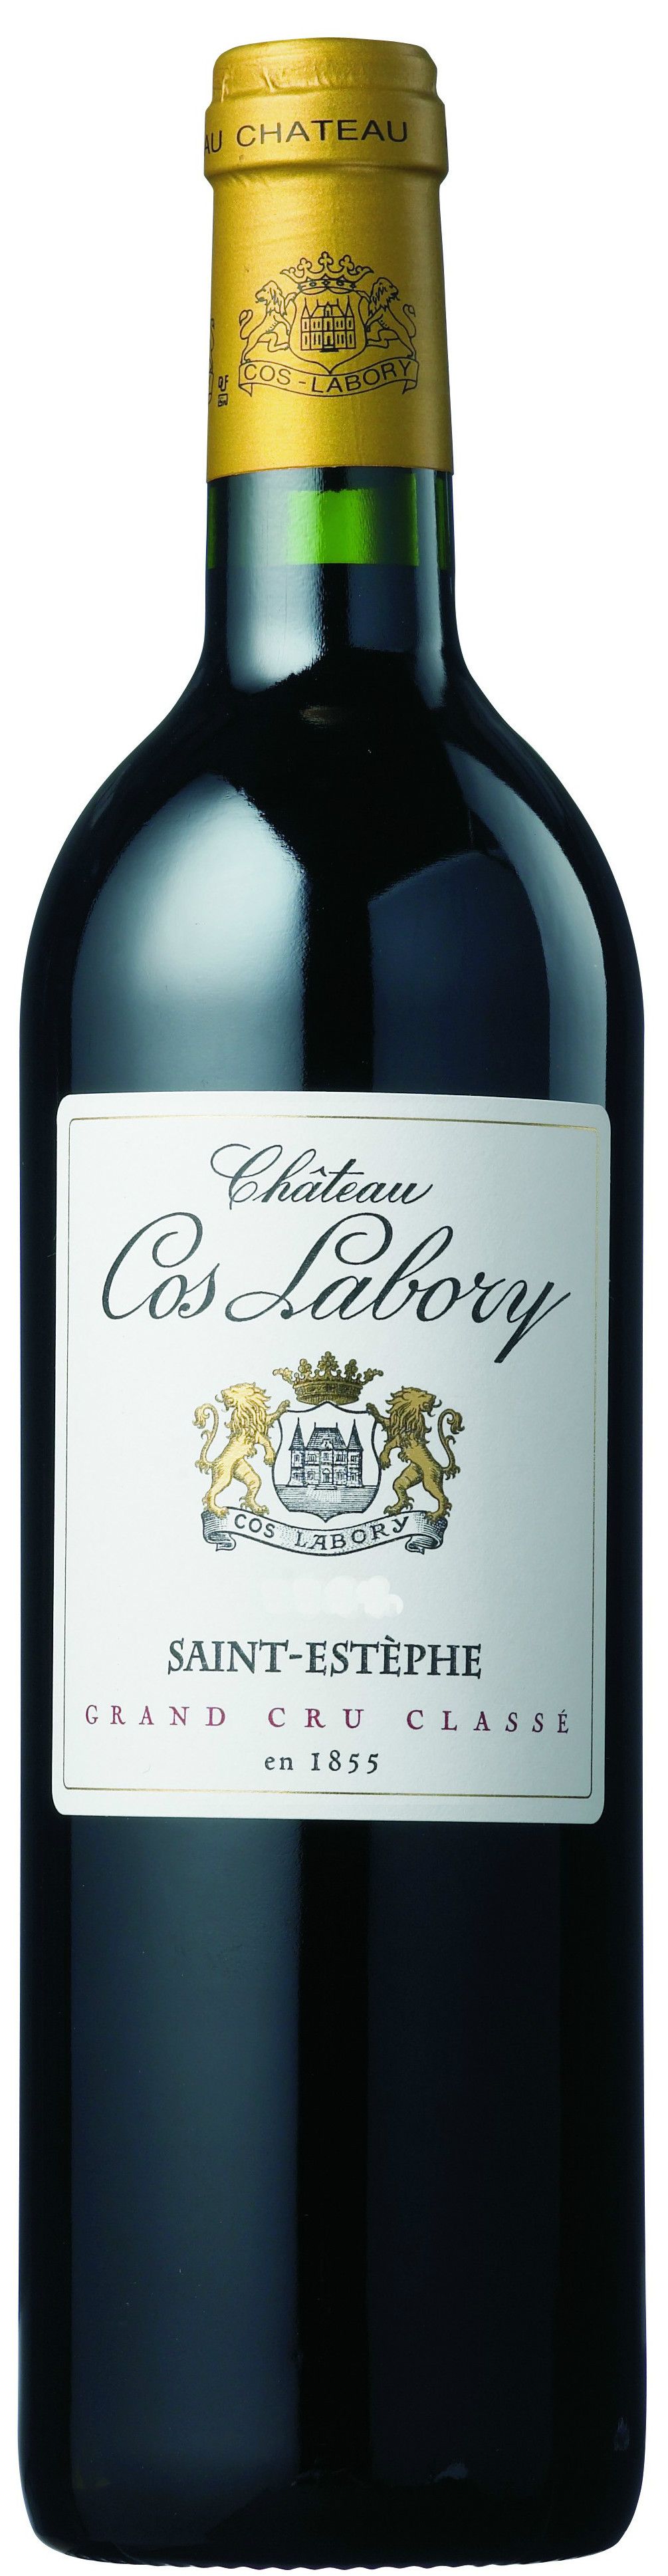 Chateau Cos Labory, 2012